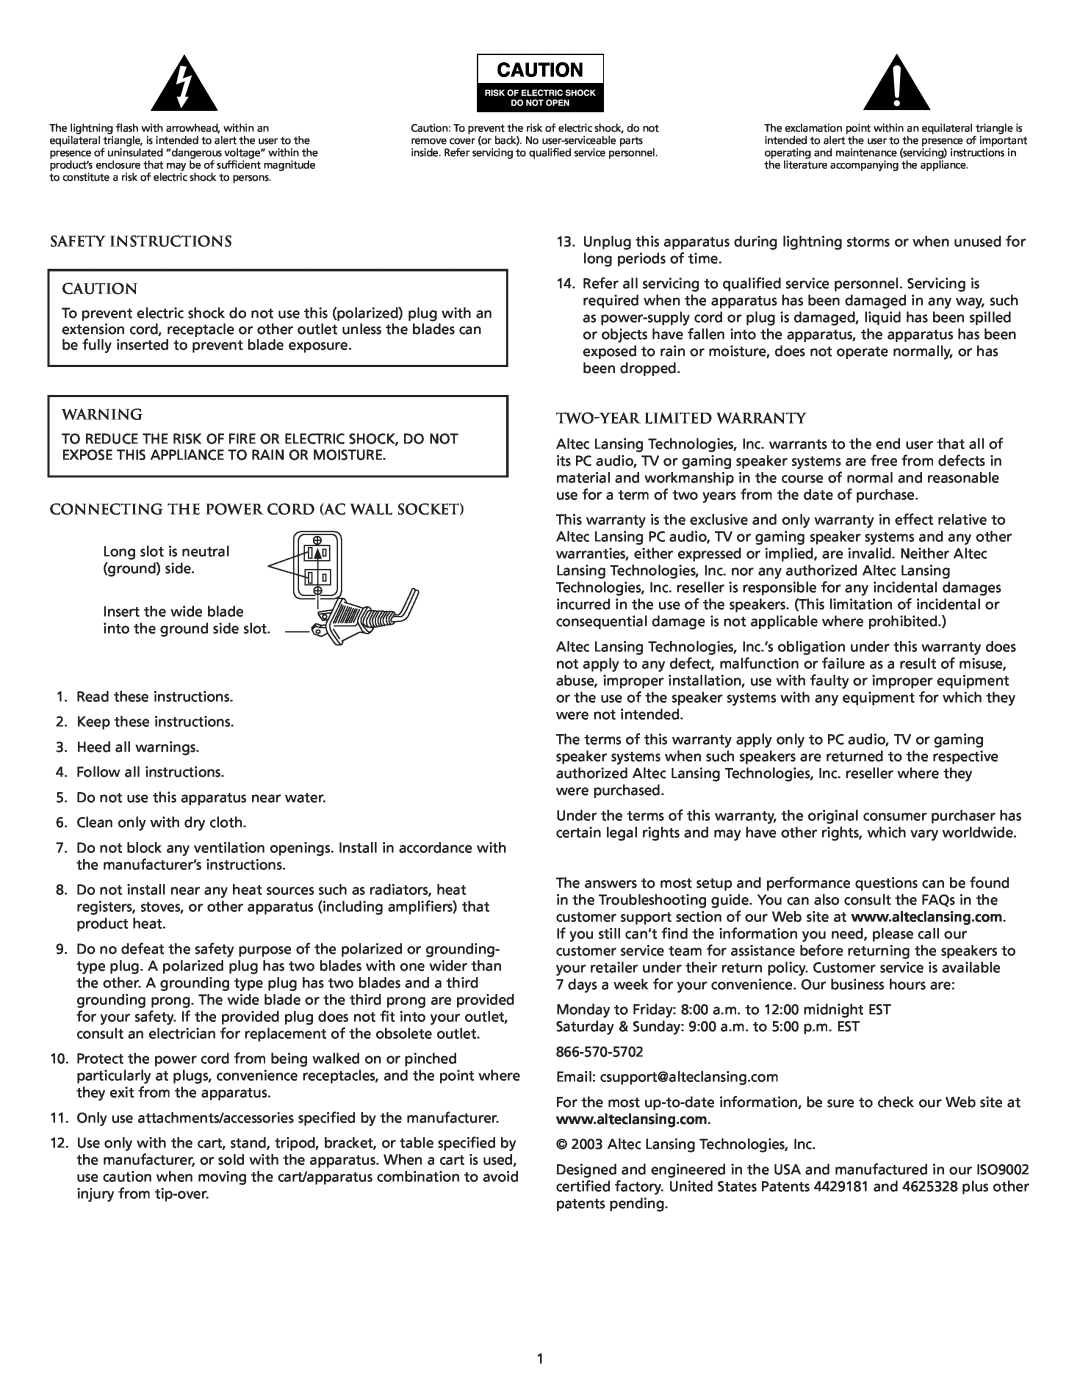 Altec Lansing VS4121 manual Safety Instructions, Connecting The Power Cord Ac Wall Socket, Two-Yearlimited Warranty 